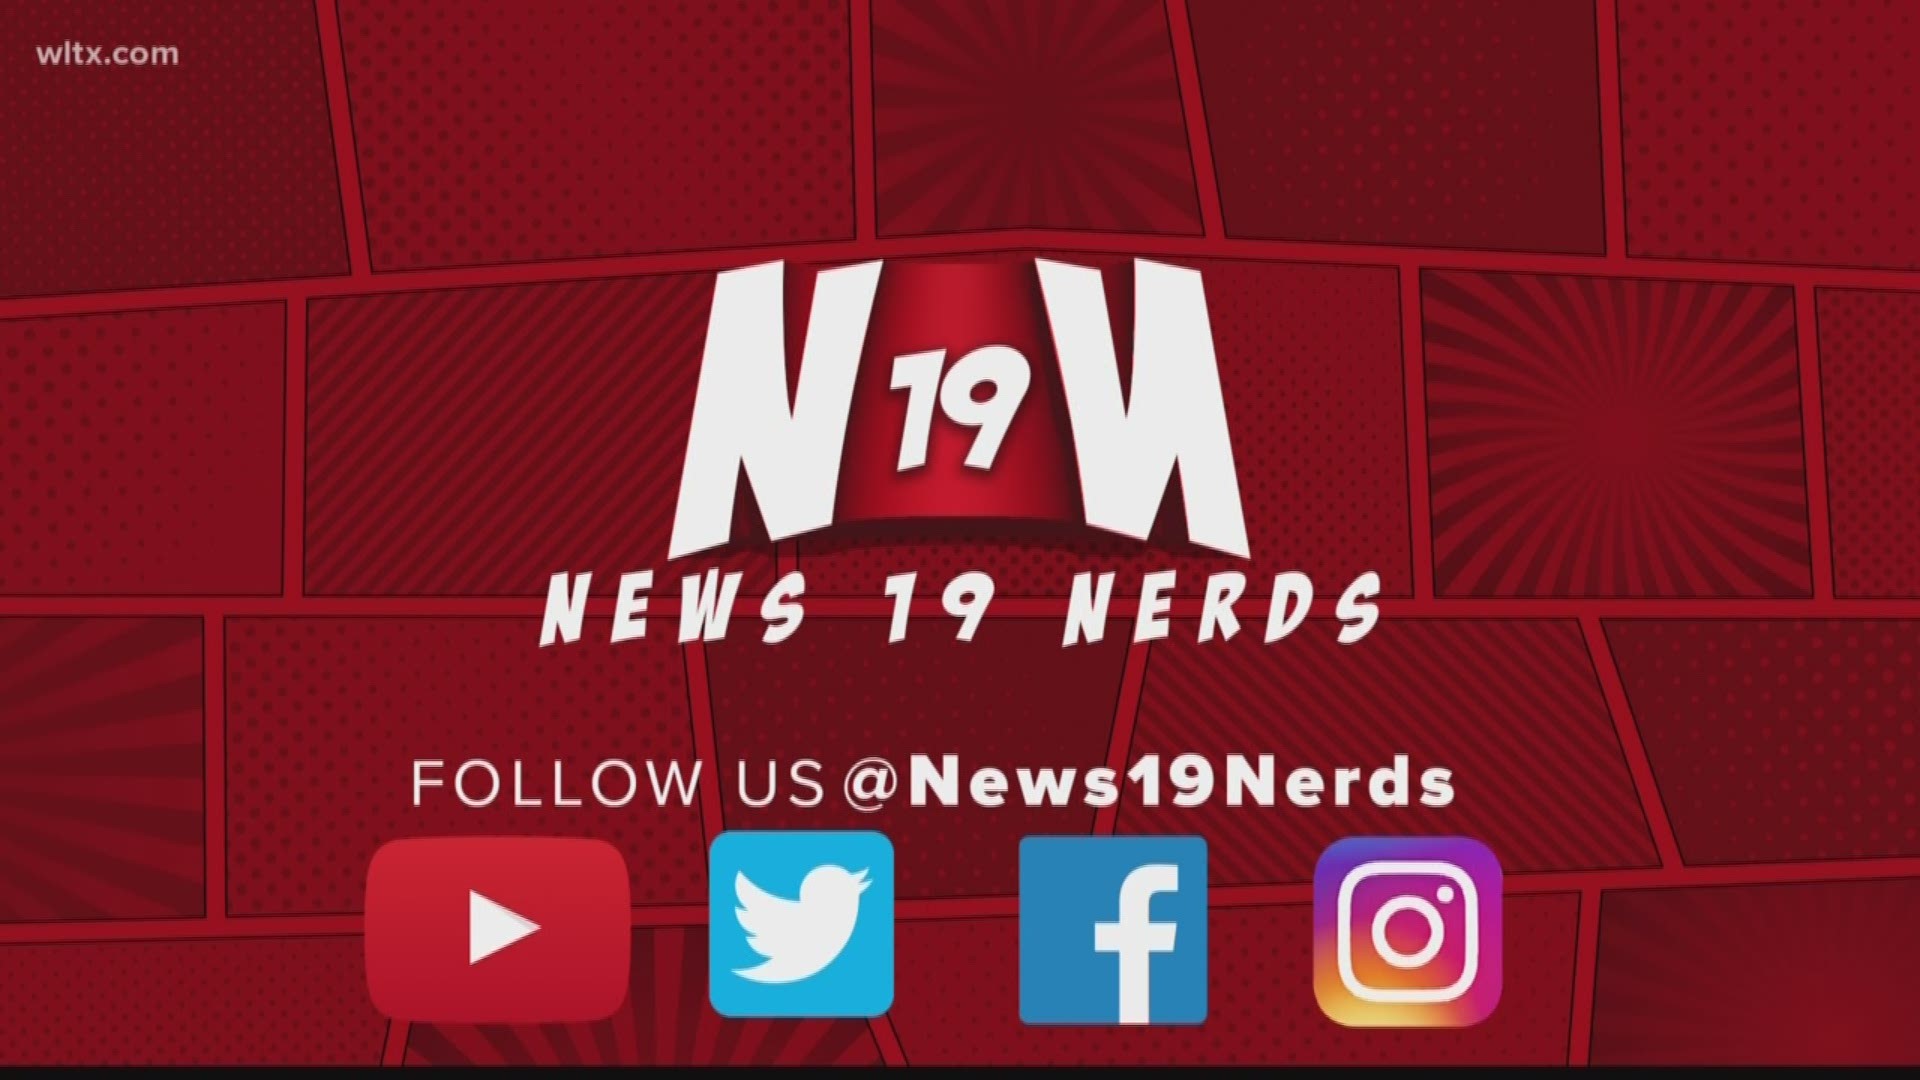 The News19 Nerds tell you all the "nerd news" you may have missed this week.